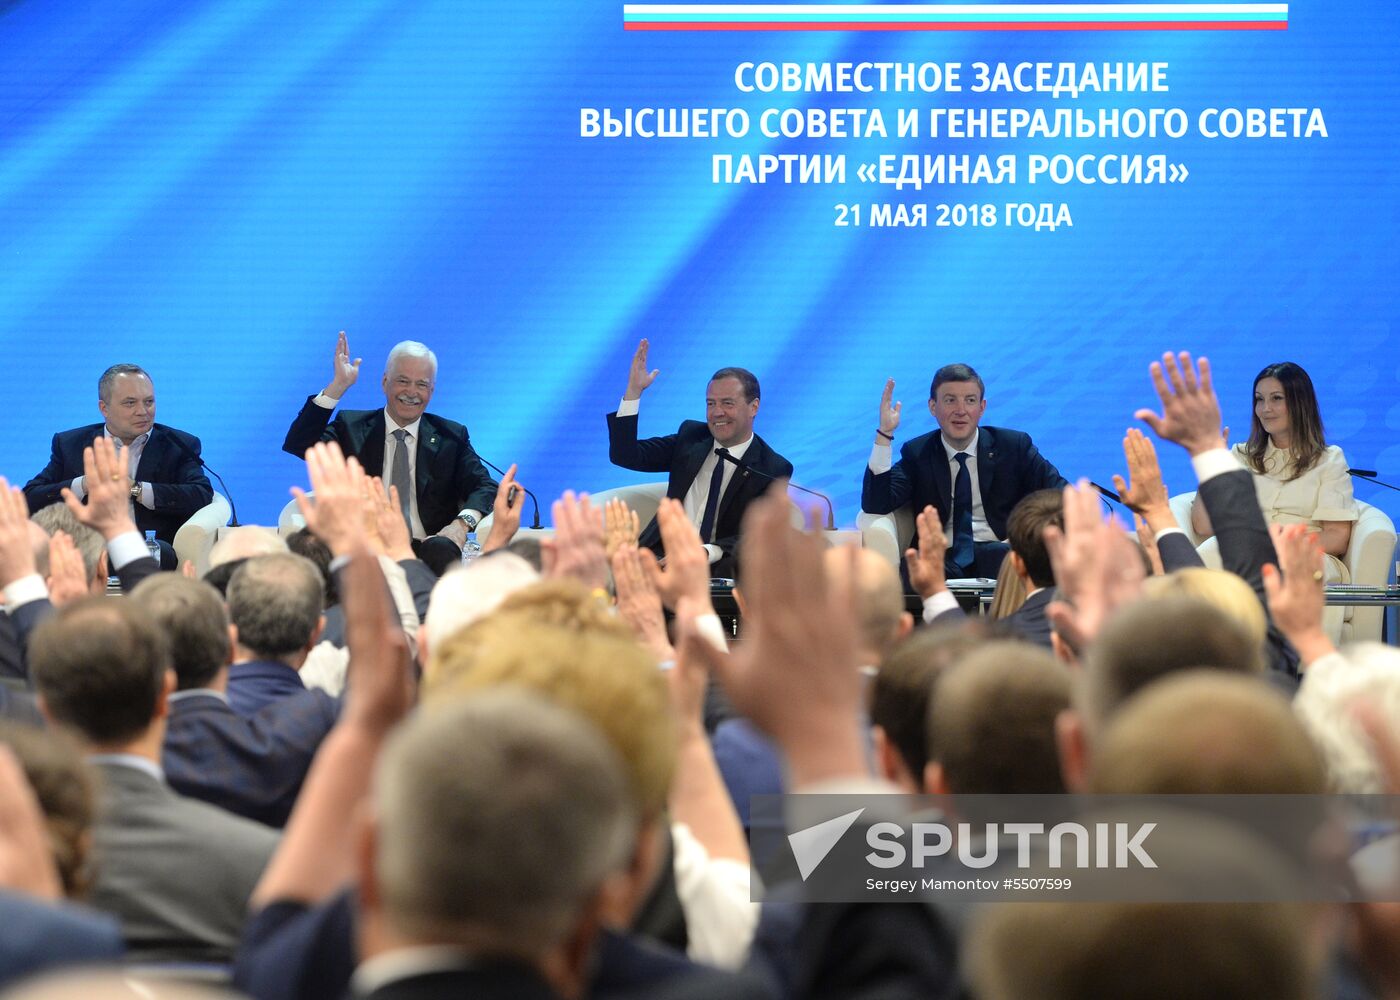 Prime Minister Dmitry Medvedev attends United Russia party conference 'Agenda 2026'